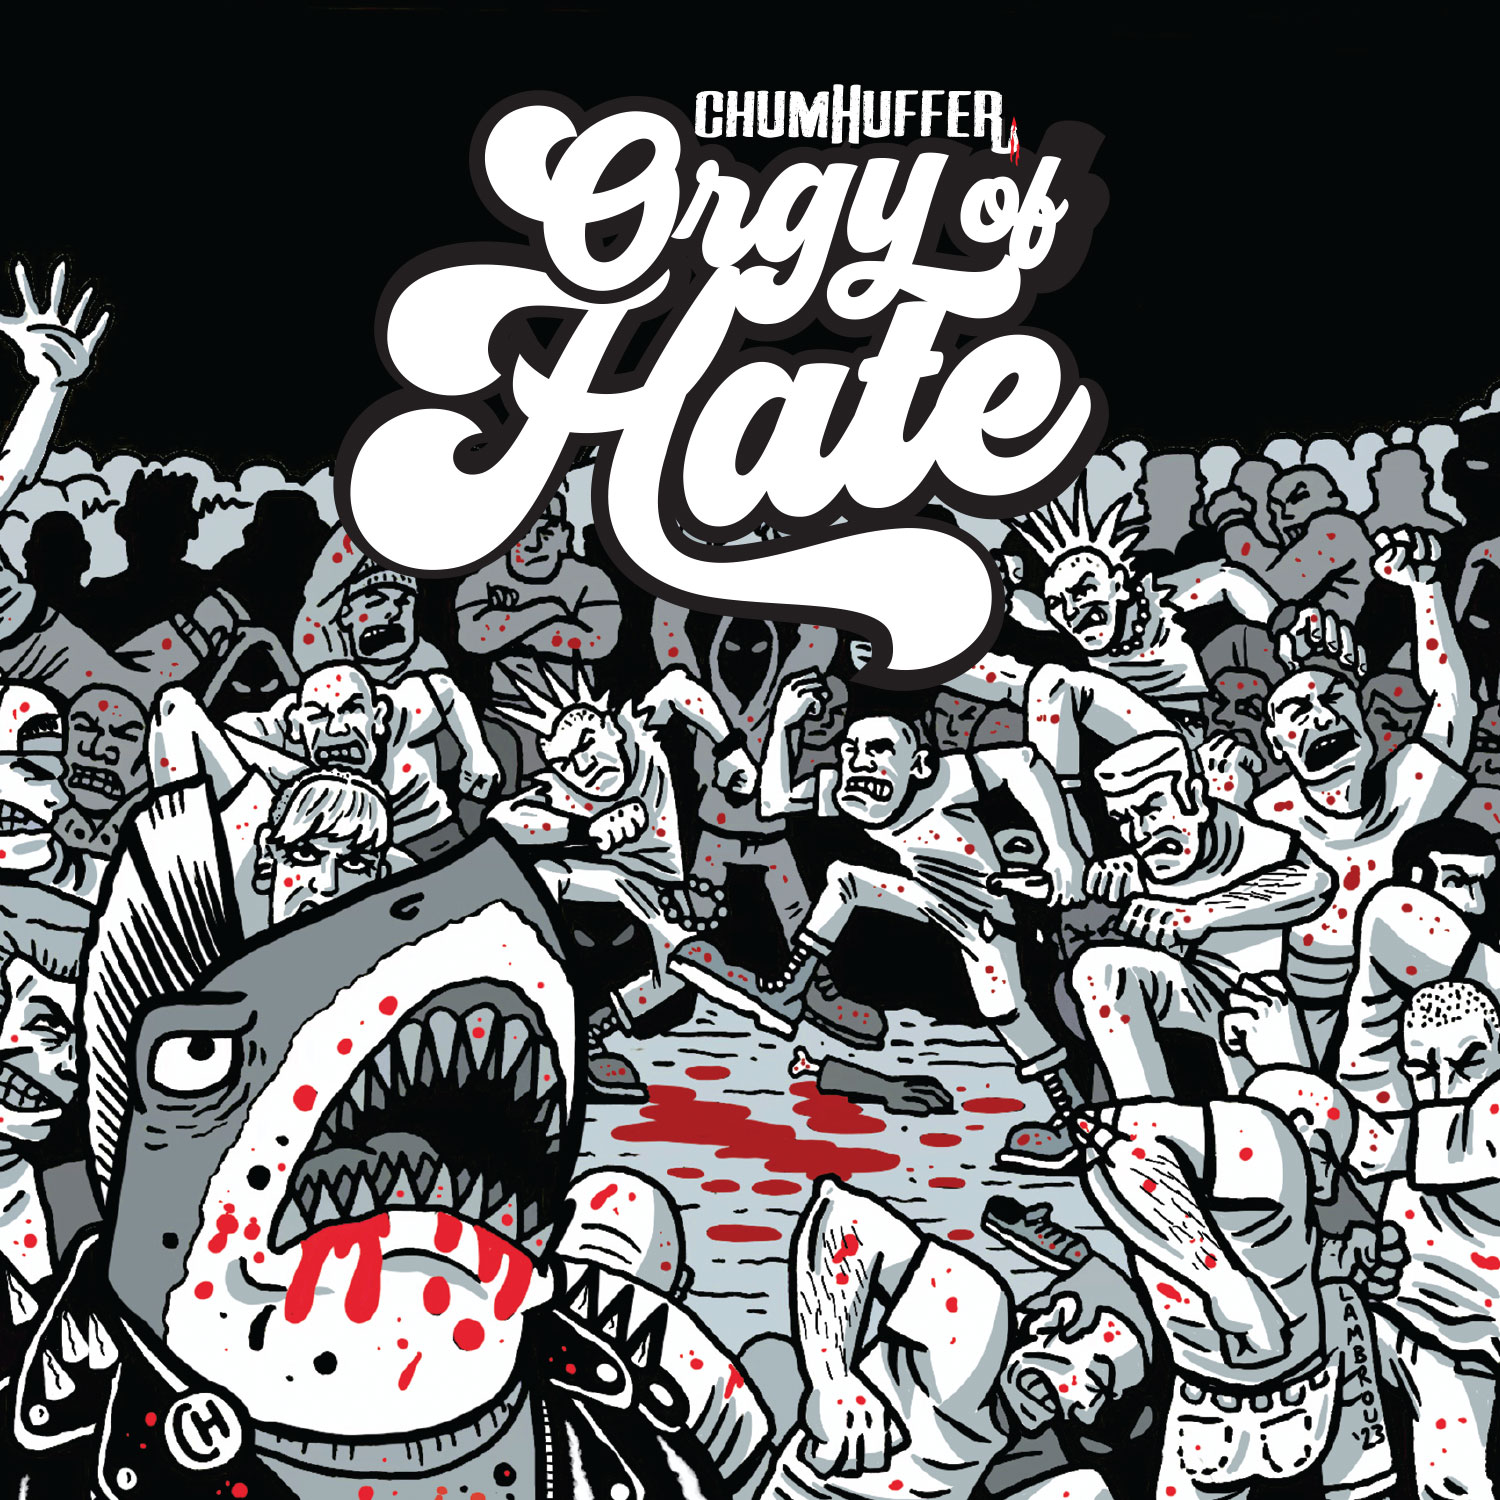 ChumHuffer Orgy of Hate Front Cover